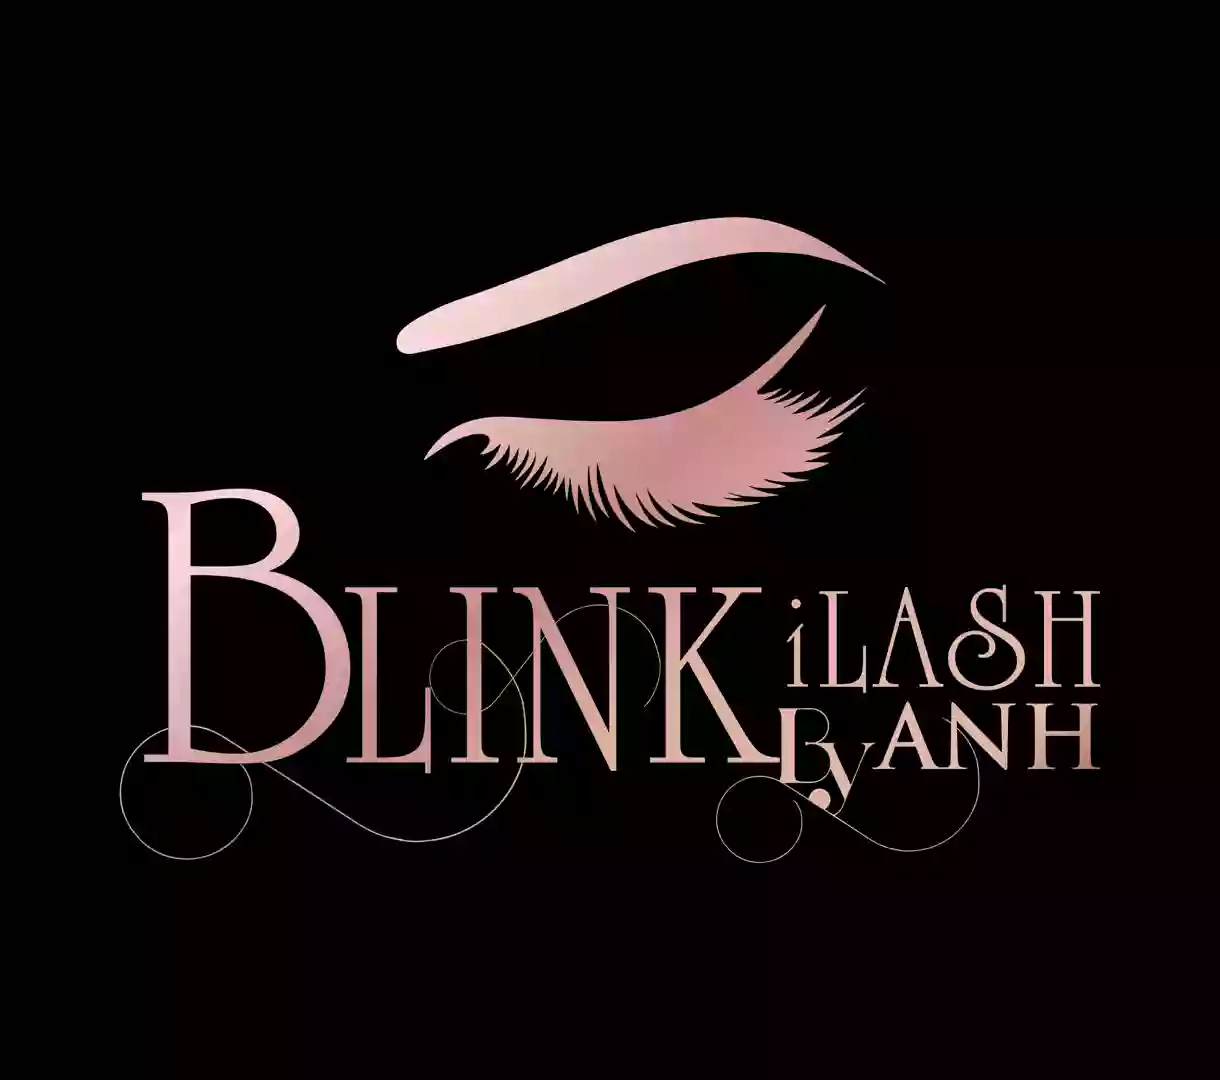 Blink ilash by Anh